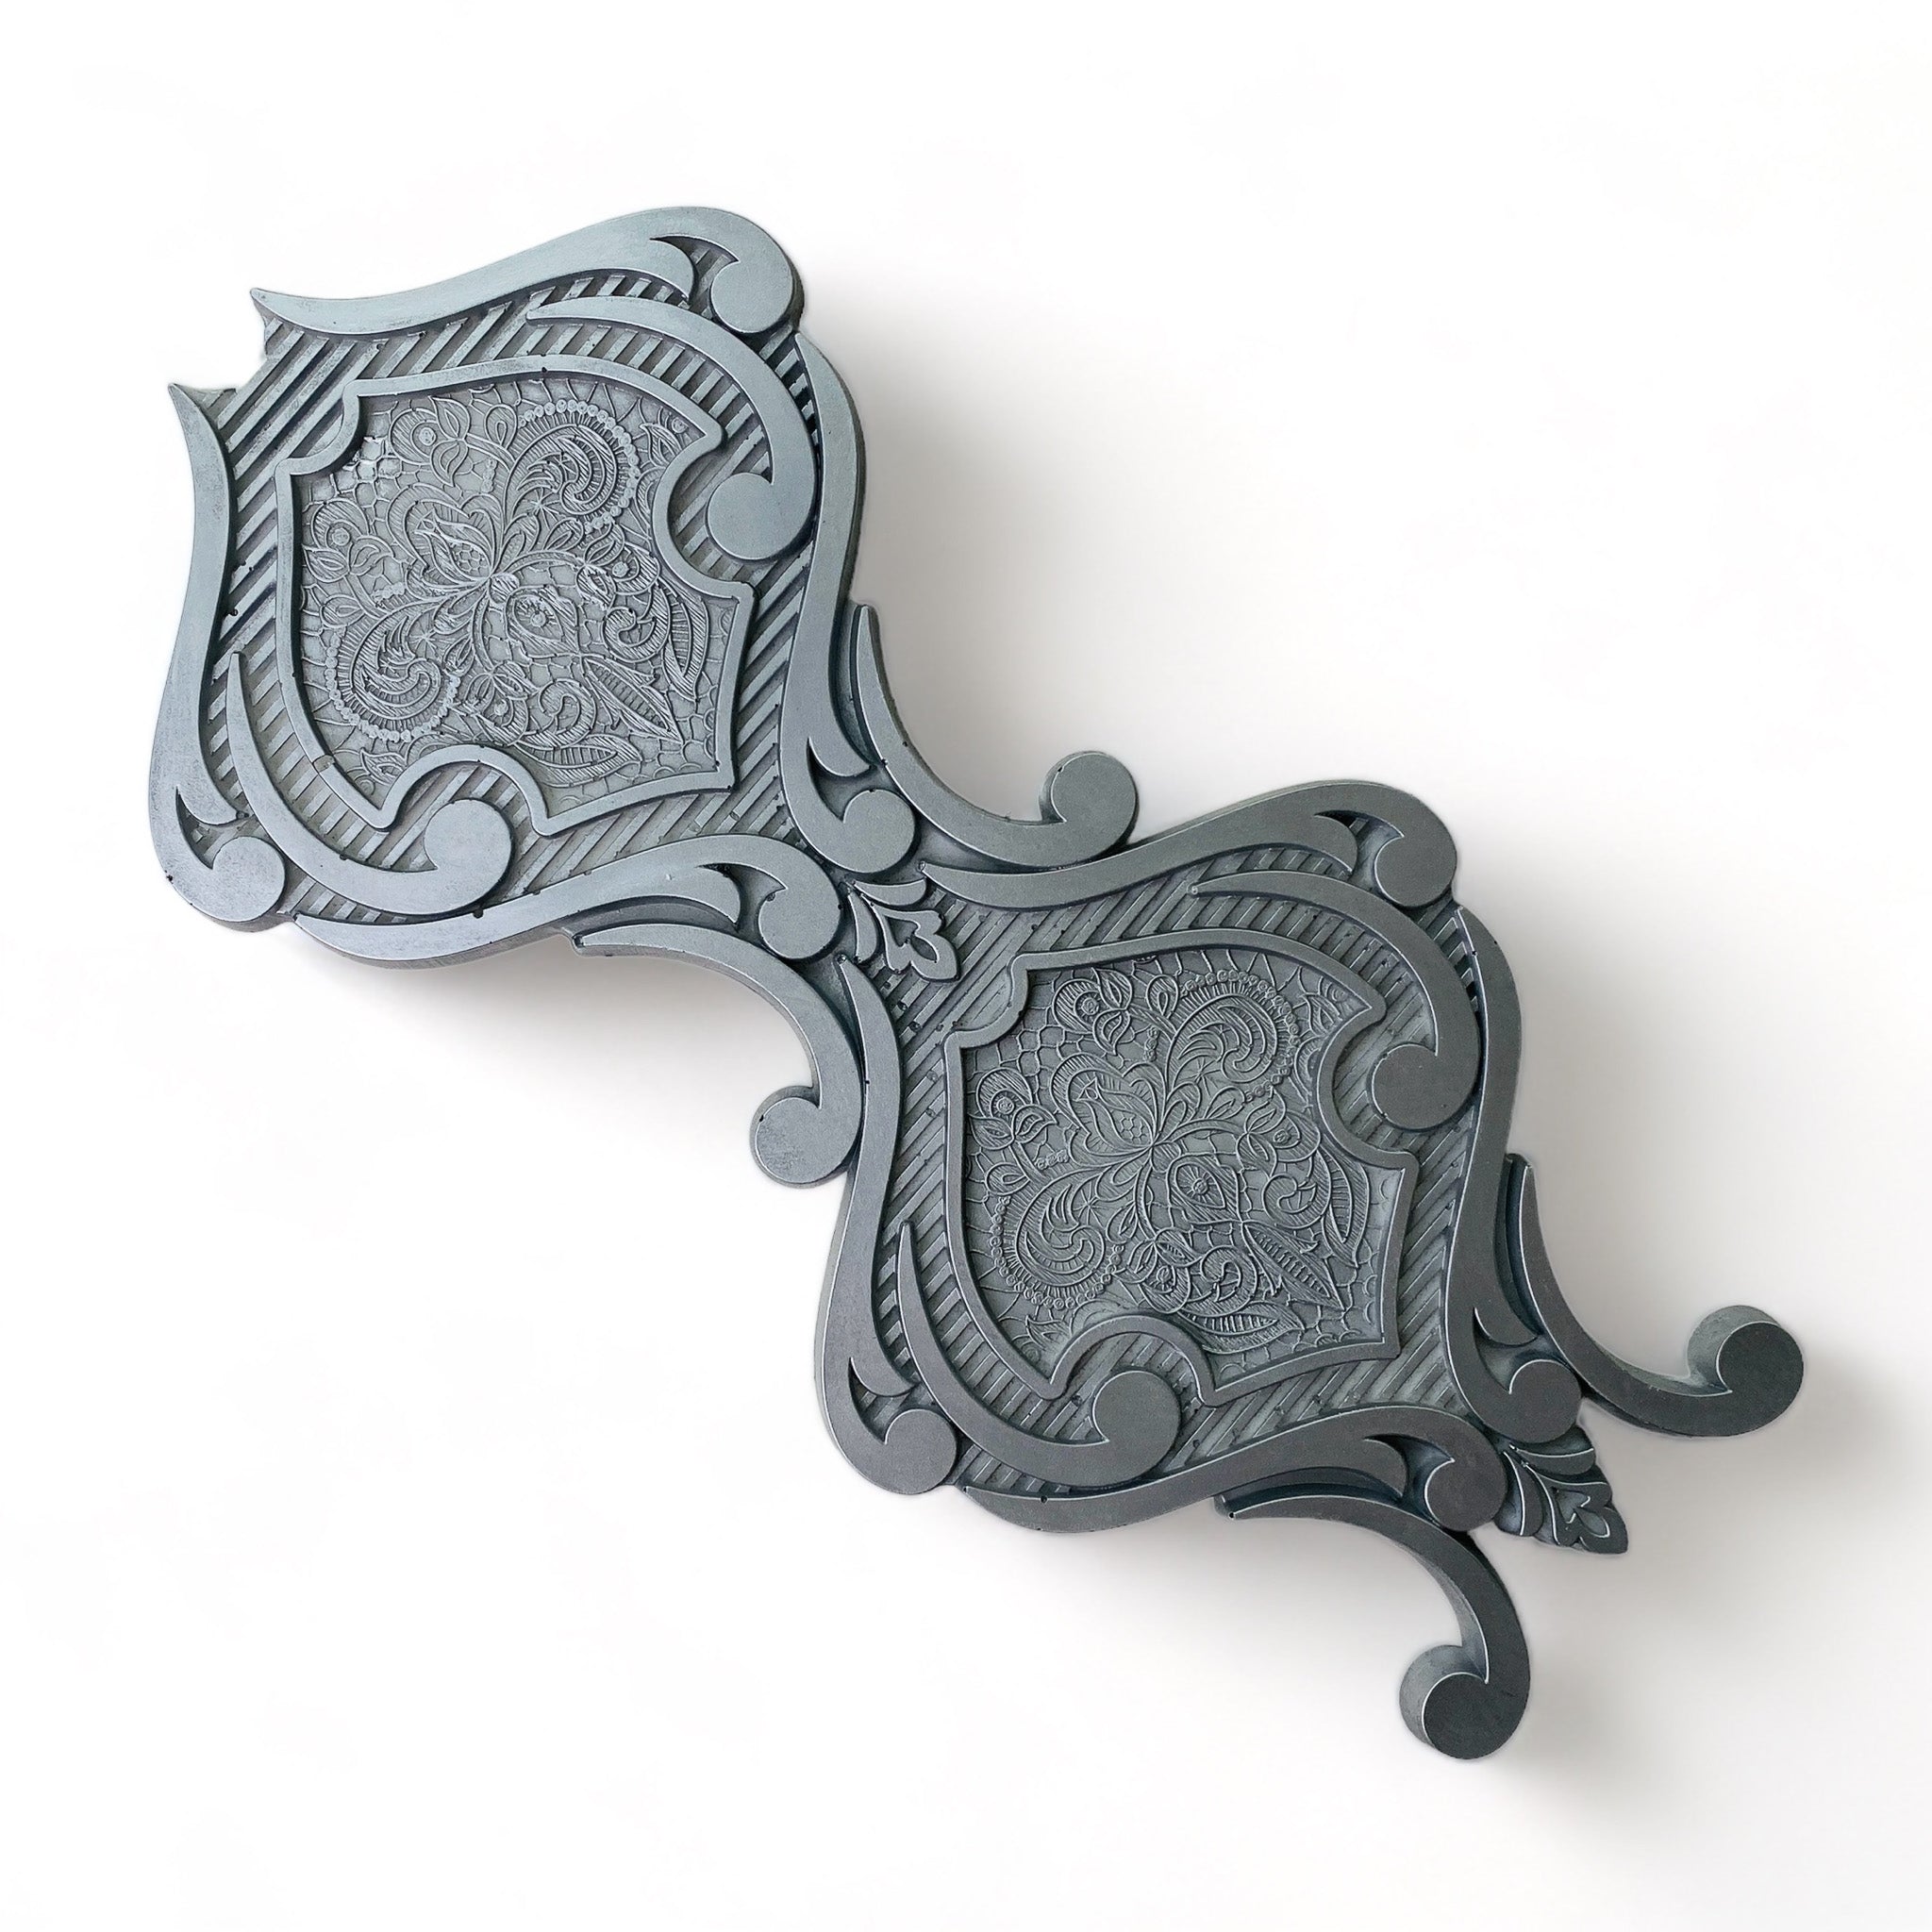 A silver-colored silicone mold casting that features a large hourglass shaped medallion is against a white background.